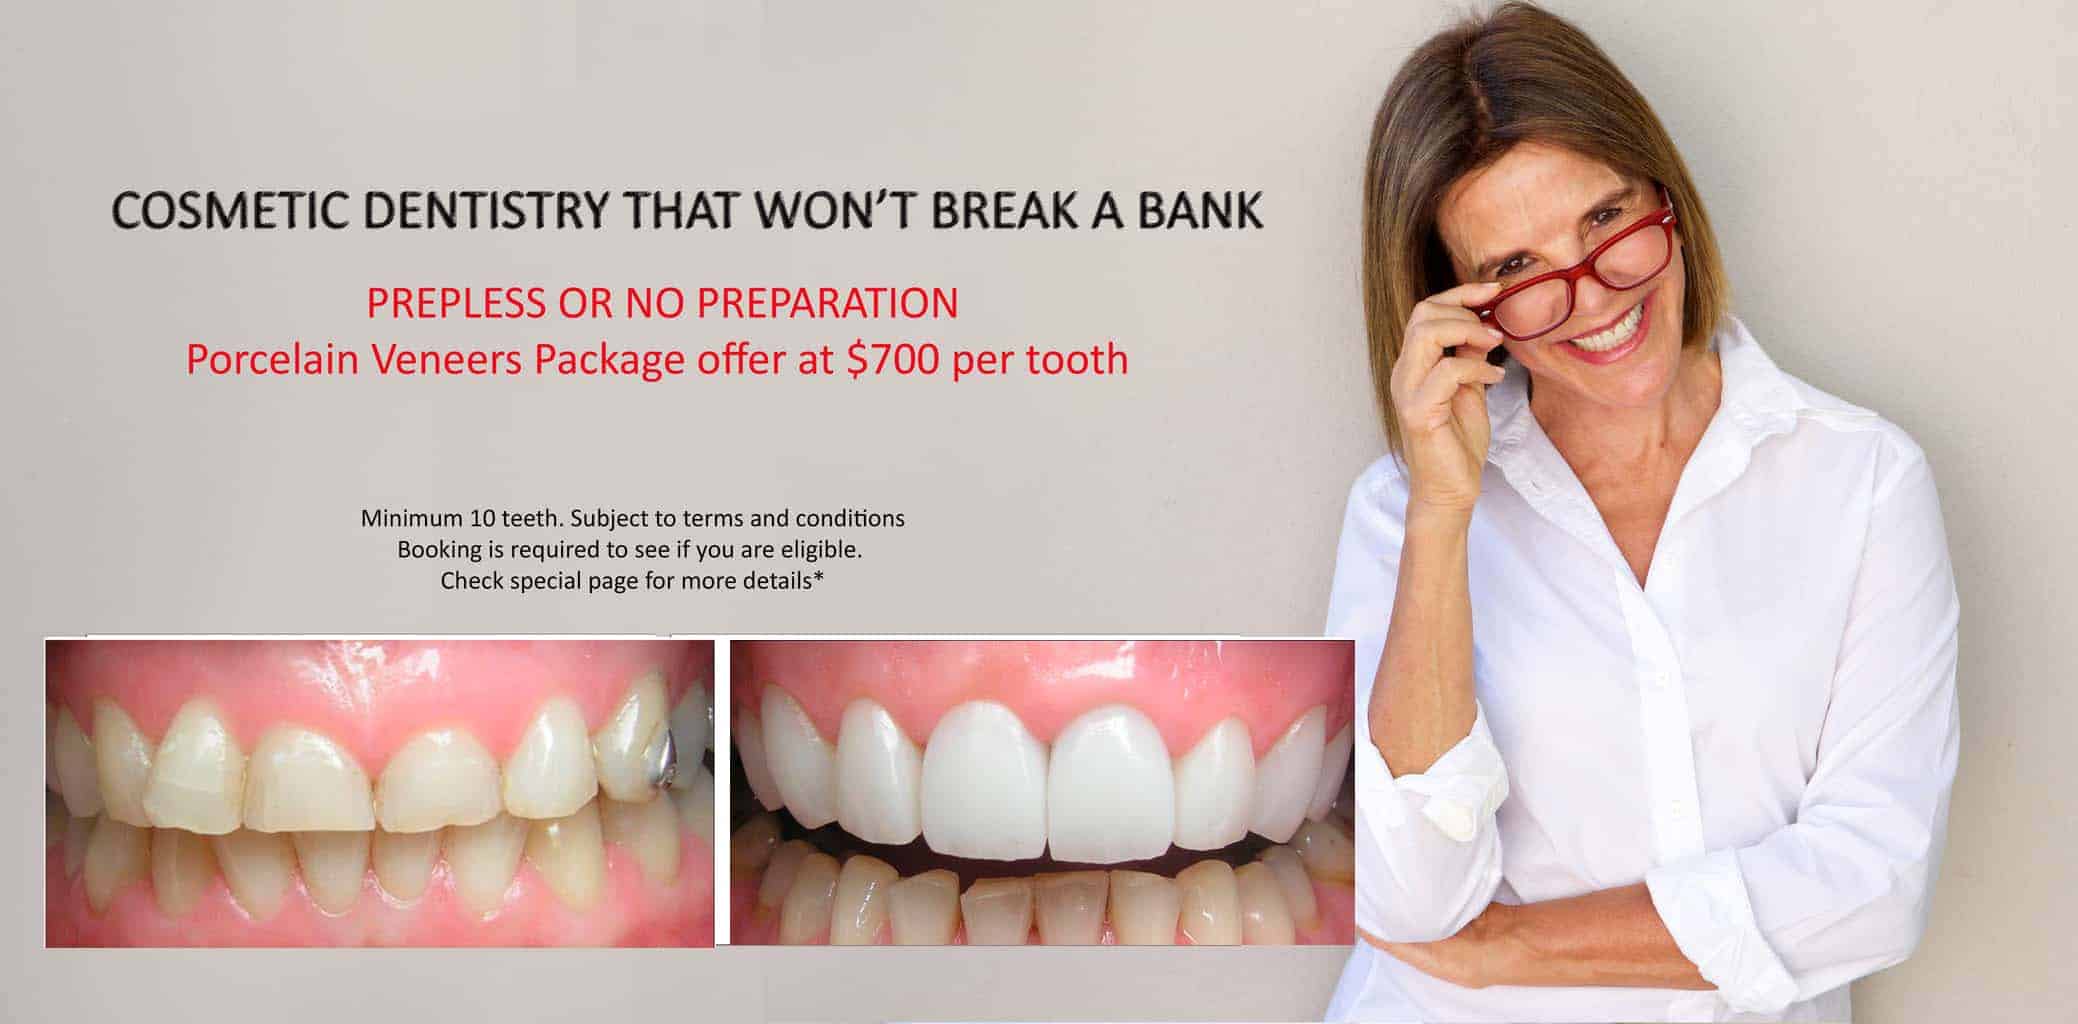 Cost of Dental Crown in Melbourne. How Much Does Dental Crown cost in Melbourne? 